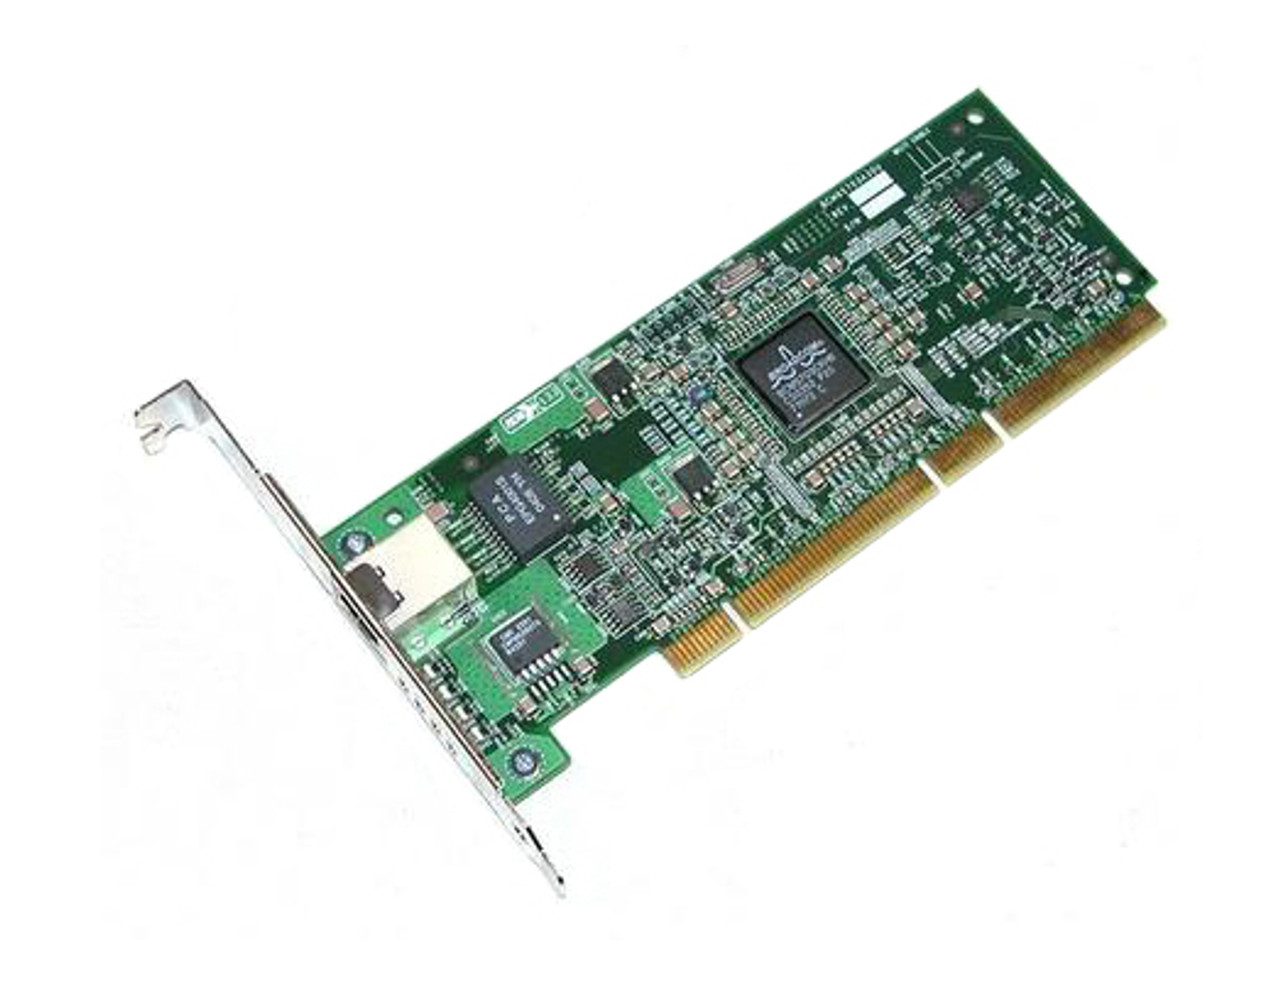 GM754 Dell NetXtreme II 5708 Single Port Gigabit Ethernet PCI Express Network Interface Card for Dell PowerEdge R200 Server